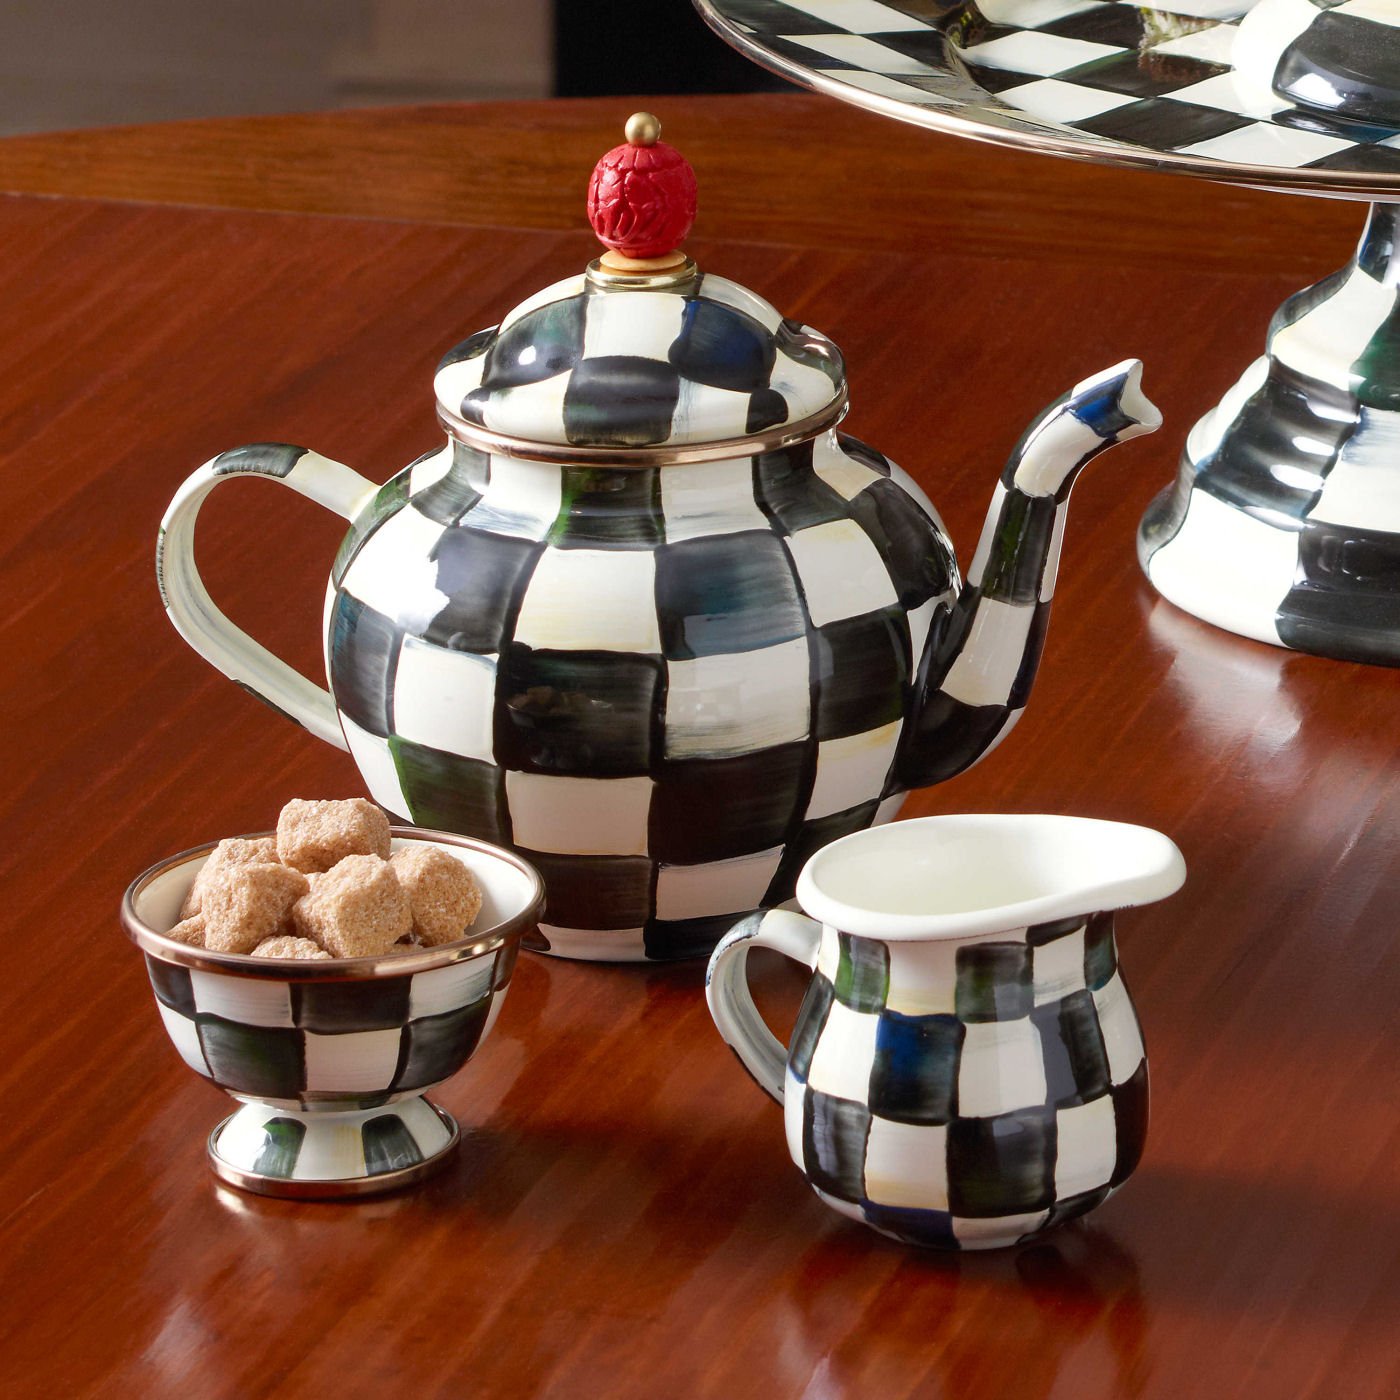 MacKenzie-Childs Courtly Check Little Sugar Bowl - |VESIMI Design| Luxury Bathrooms and Home Decor